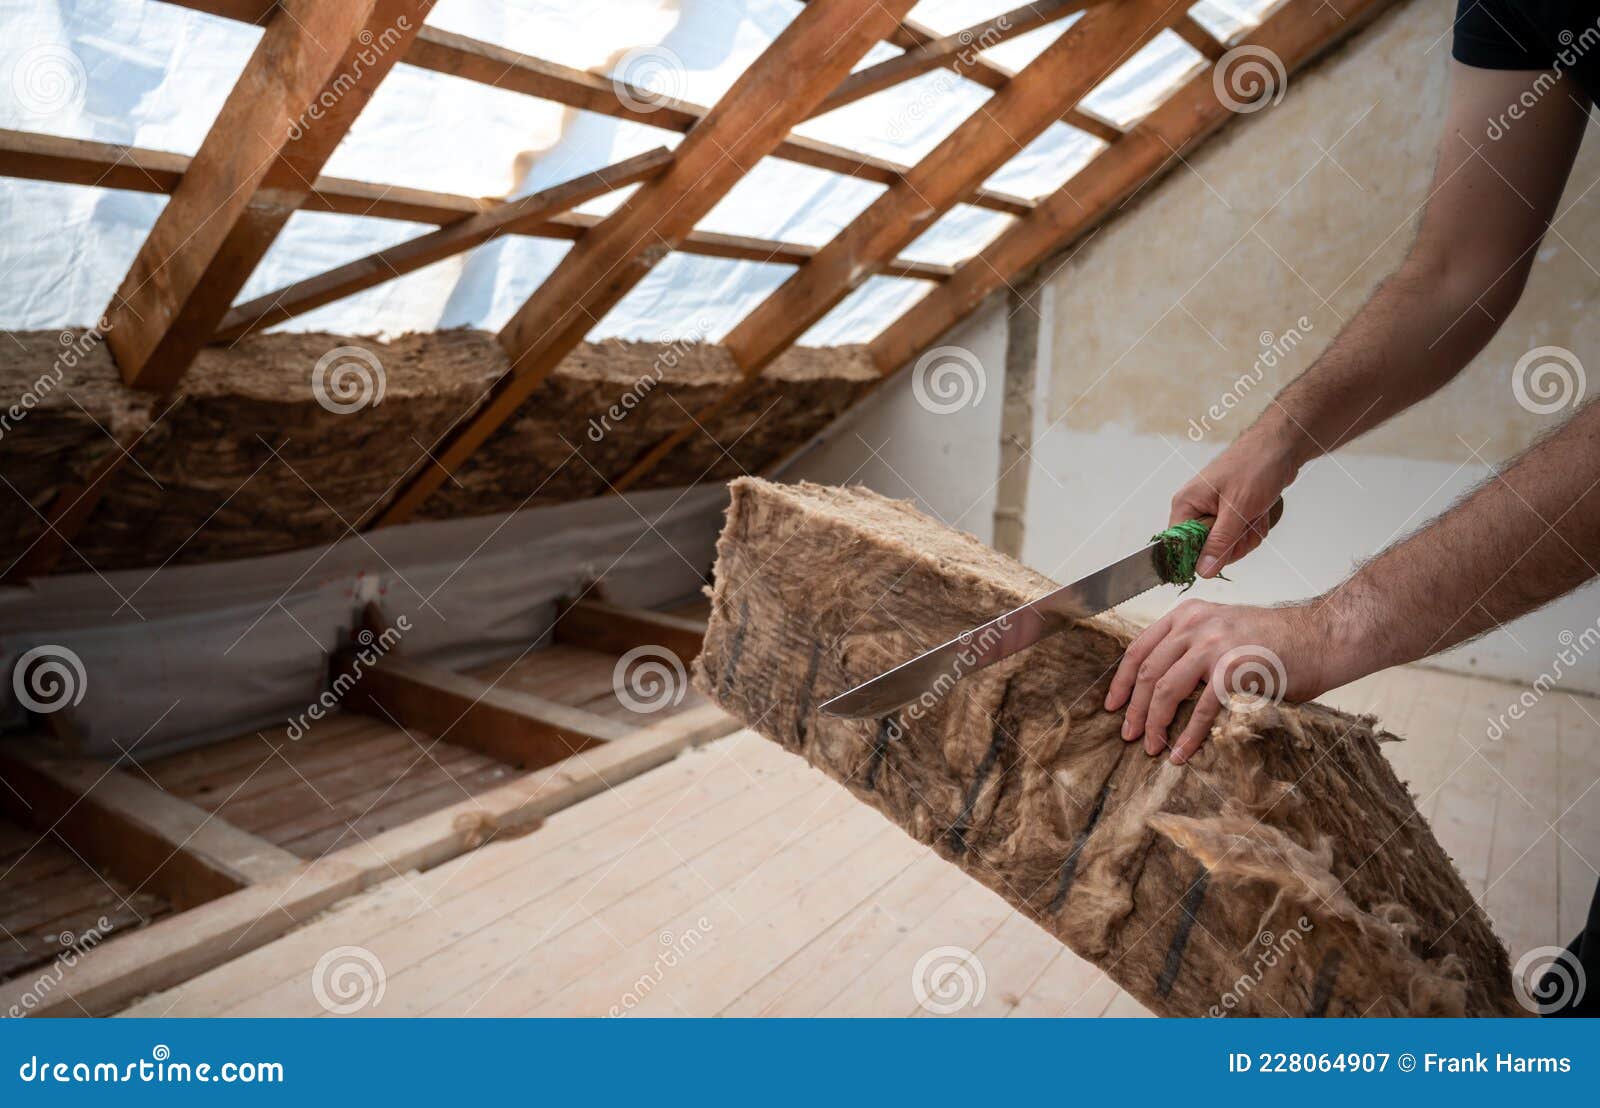 craftsman cutting insulation material to insulate the attic